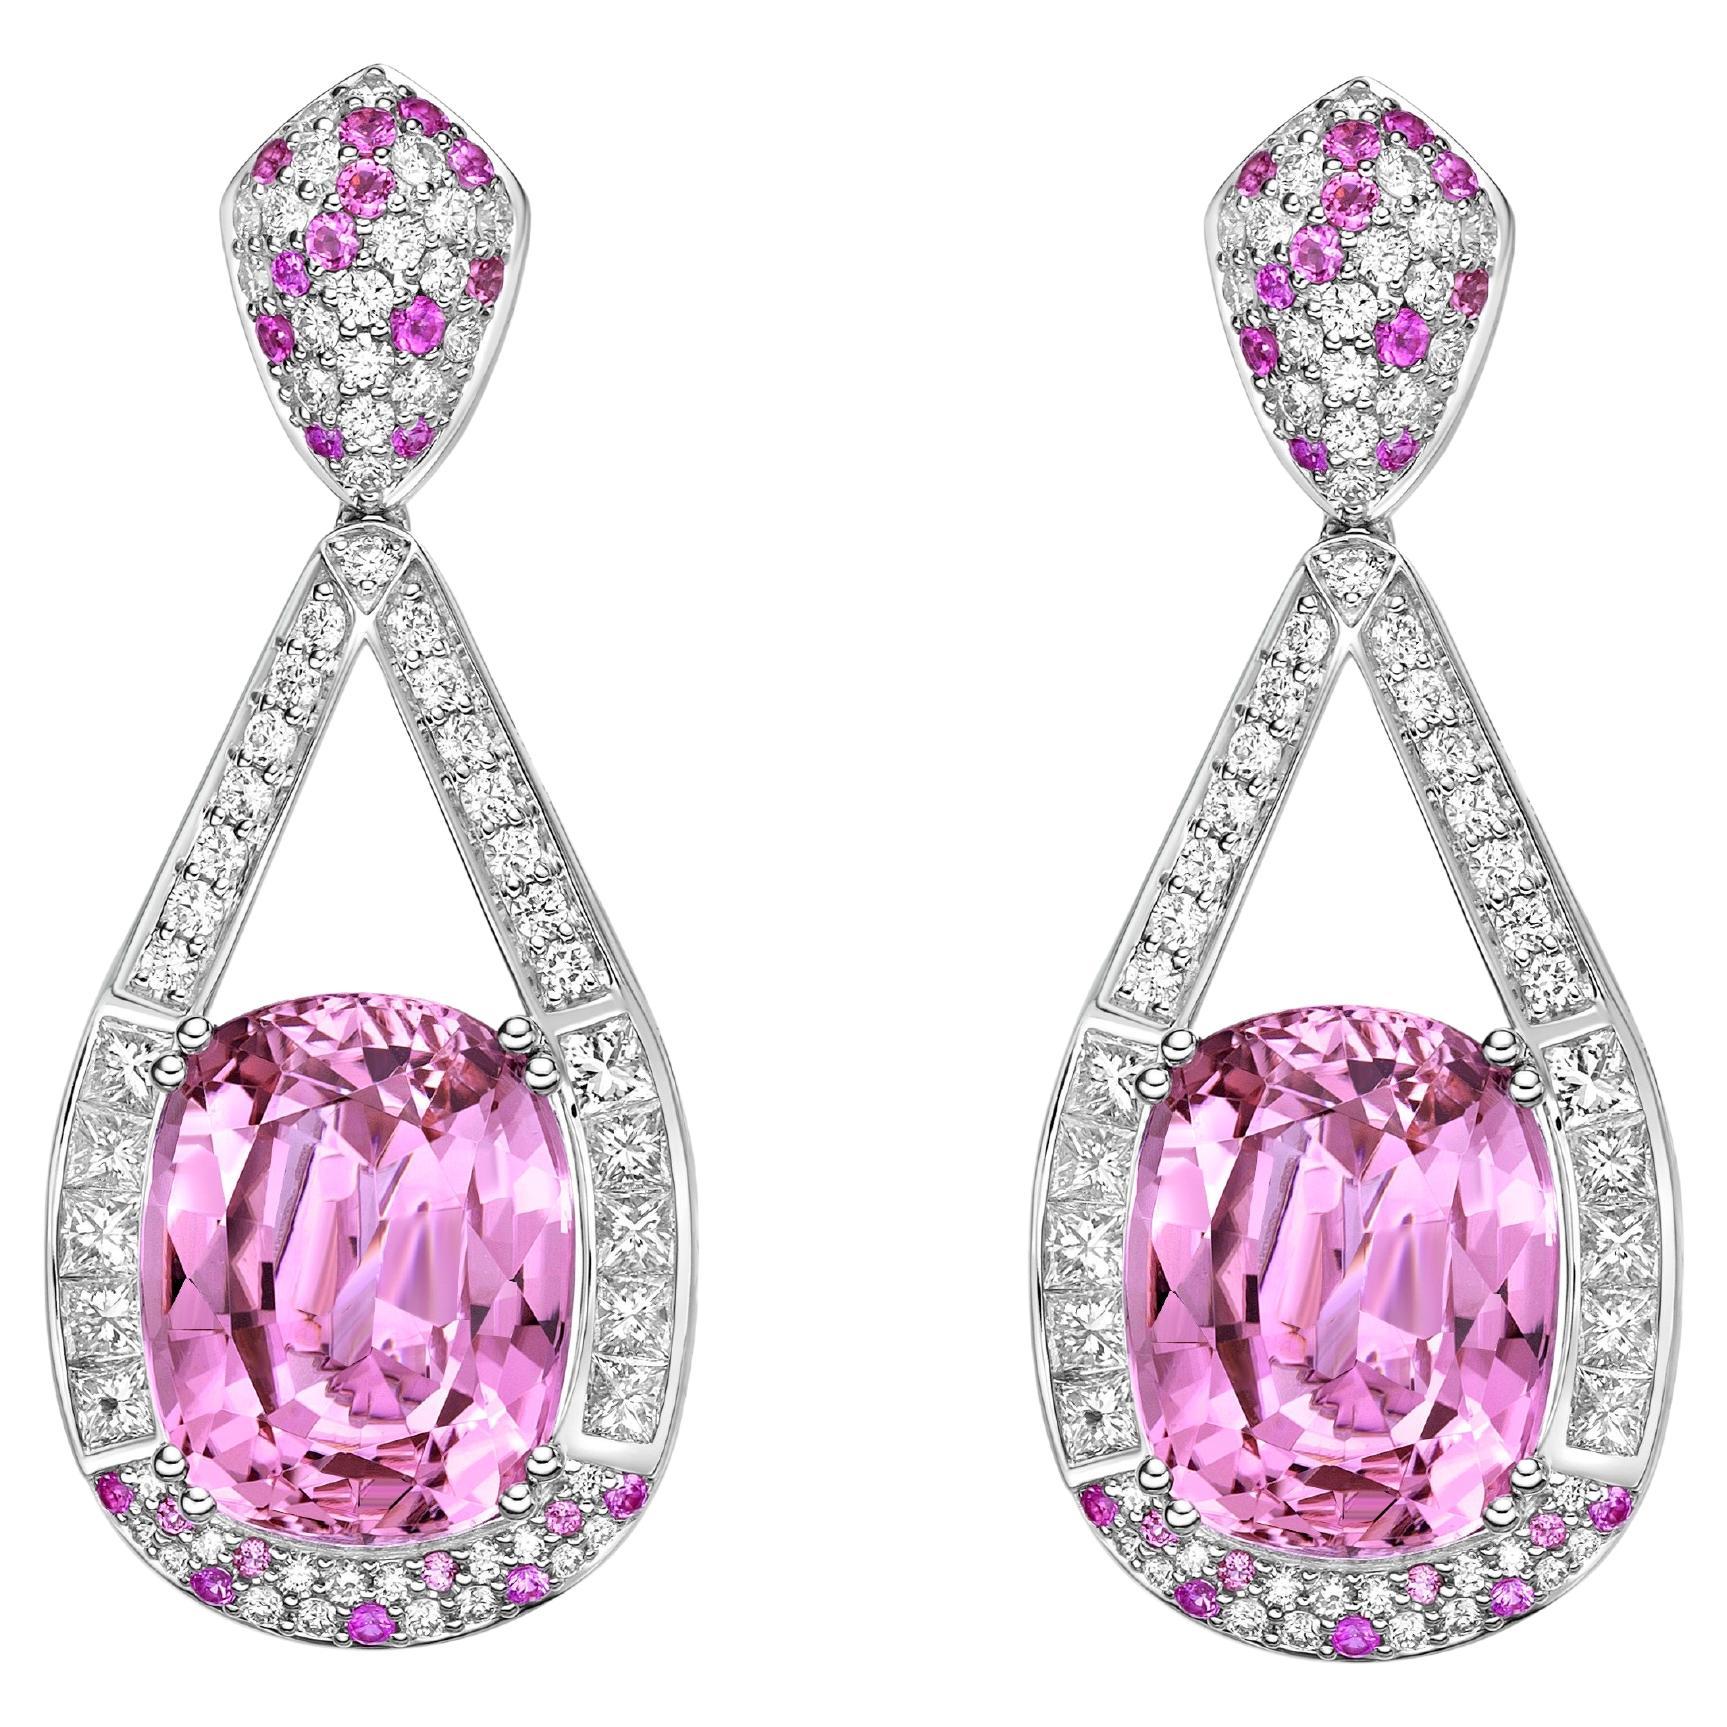 17.72 Carat Pink Tourmaline Drop Earrings in 18Karat White Gold with Diamond. For Sale